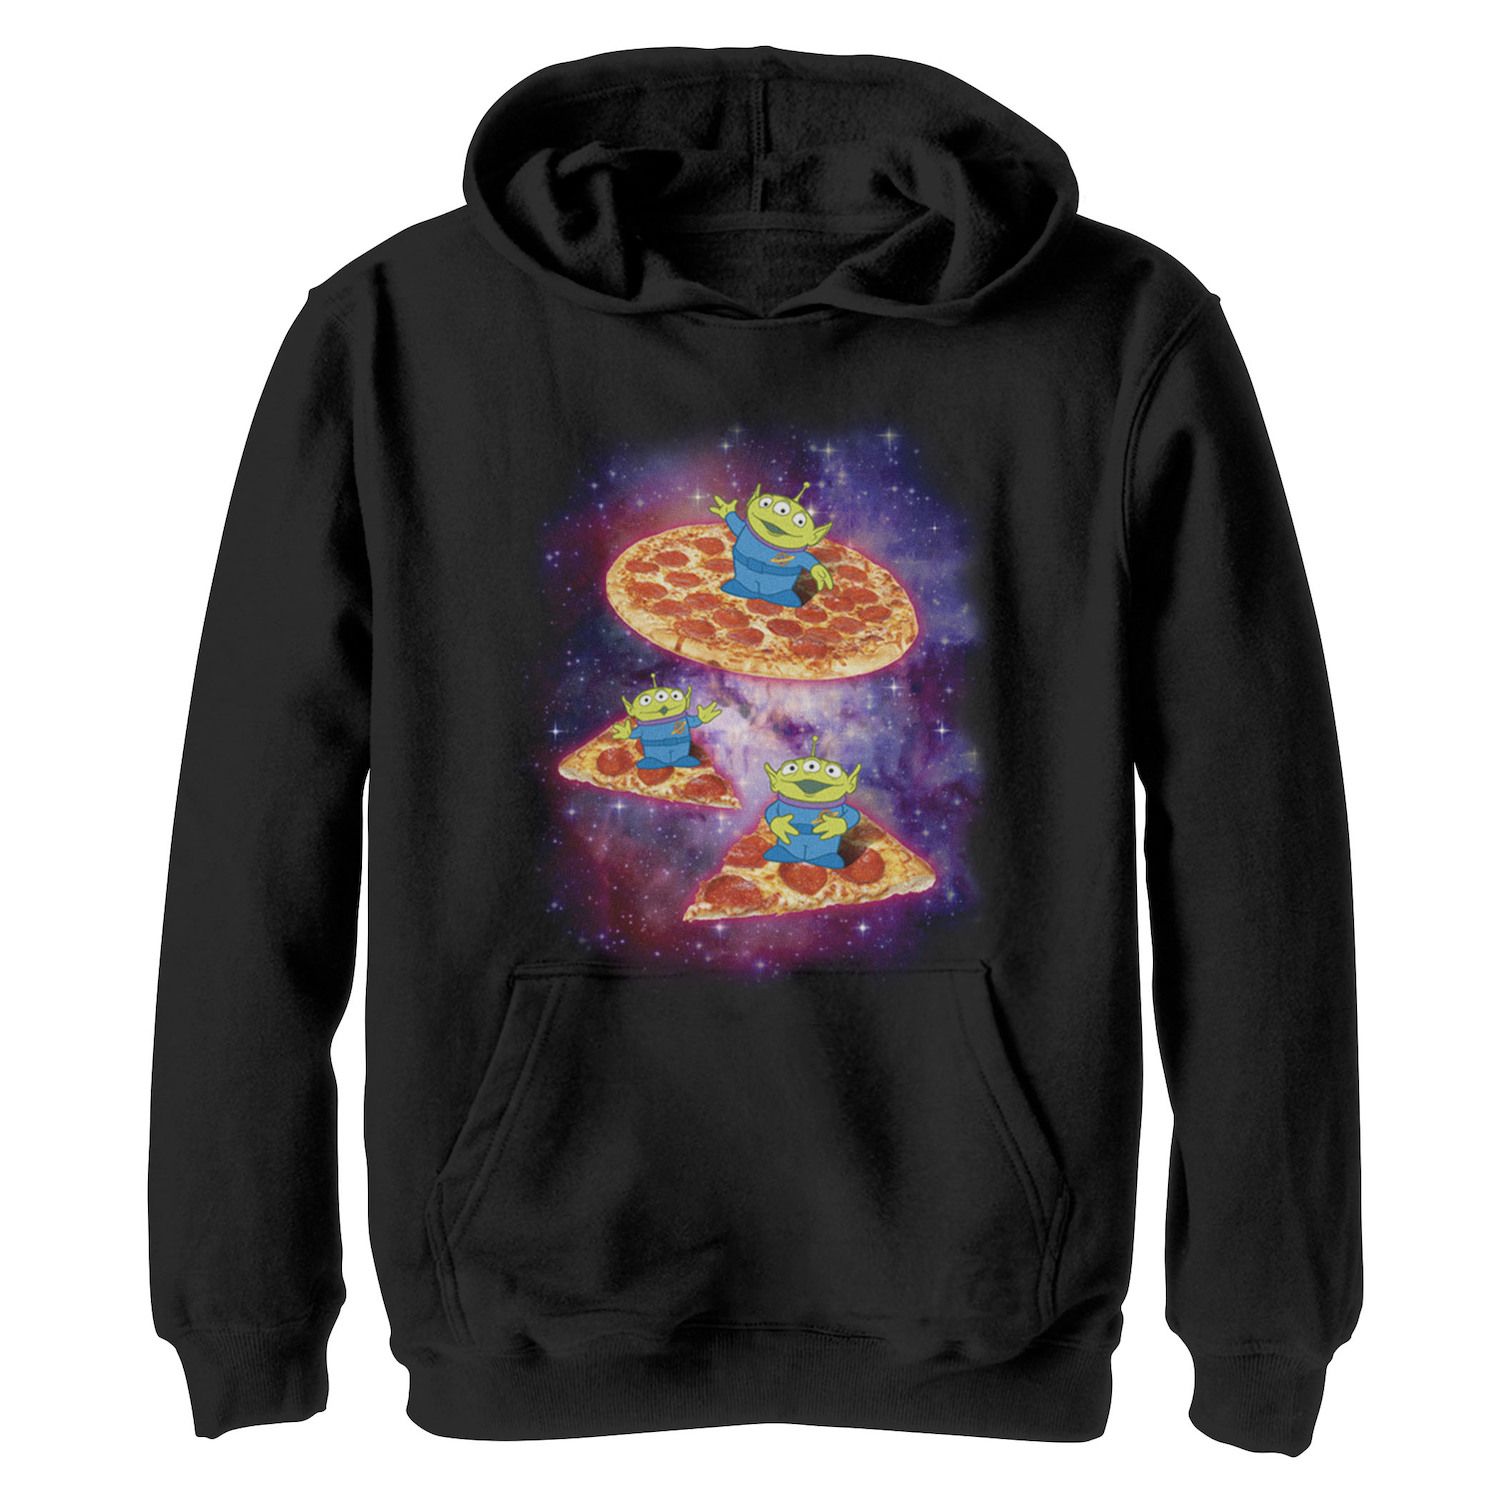 Image for Disney / Pixar 's Toy Story Boys 8-20 Aliens Space Pizza Graphic Fleece Hoodie at Kohl's.